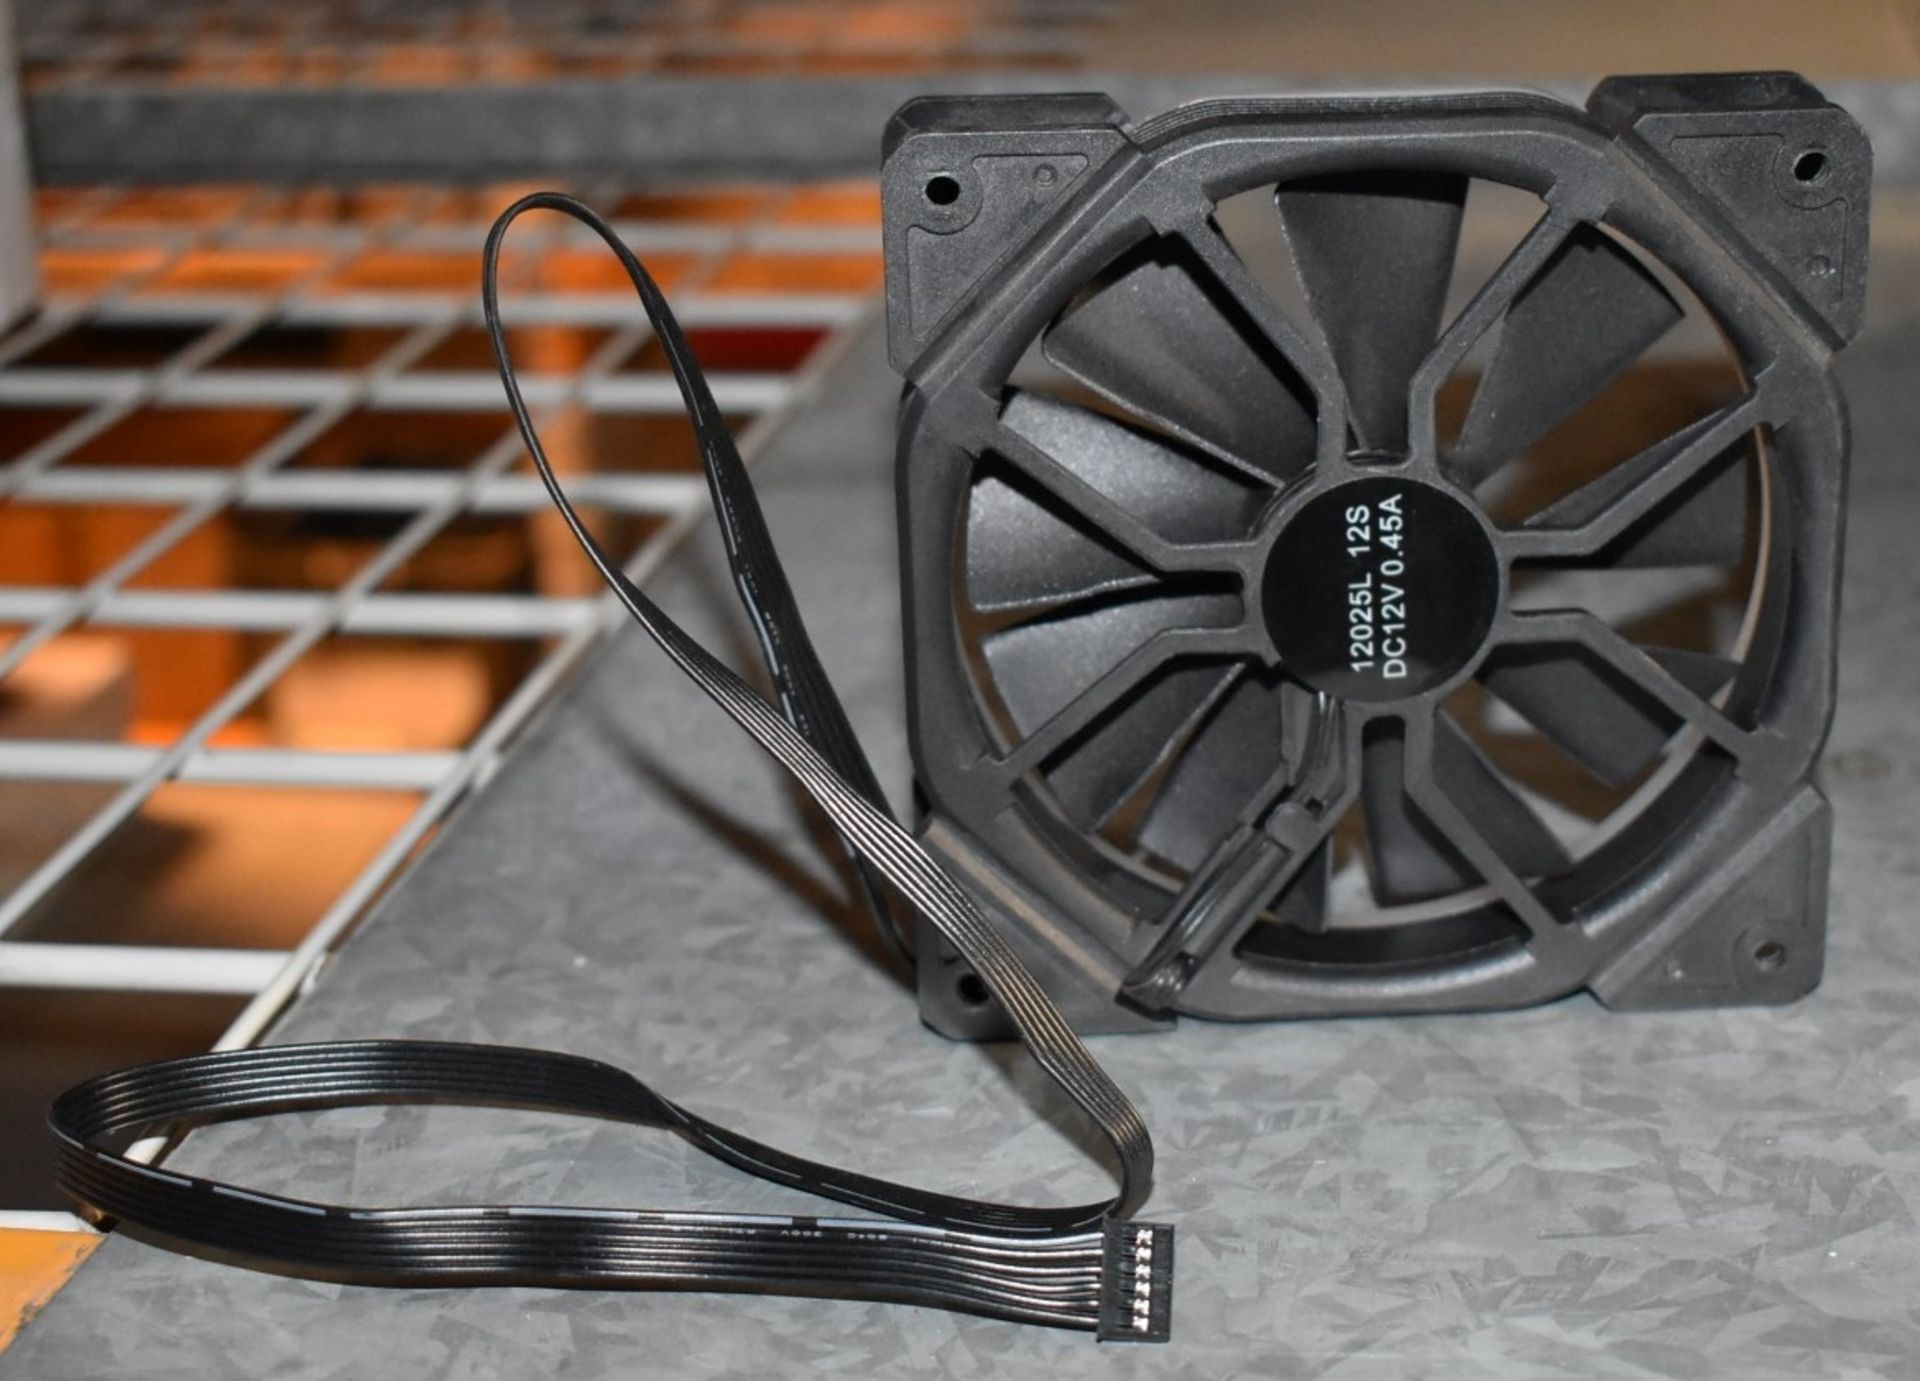 6 x Halo PC Gaming Case 120mm Cooling Fans - Dual-Ring, RGB LED, Hydro Bearing, 9 Blade Fan - Image 3 of 5